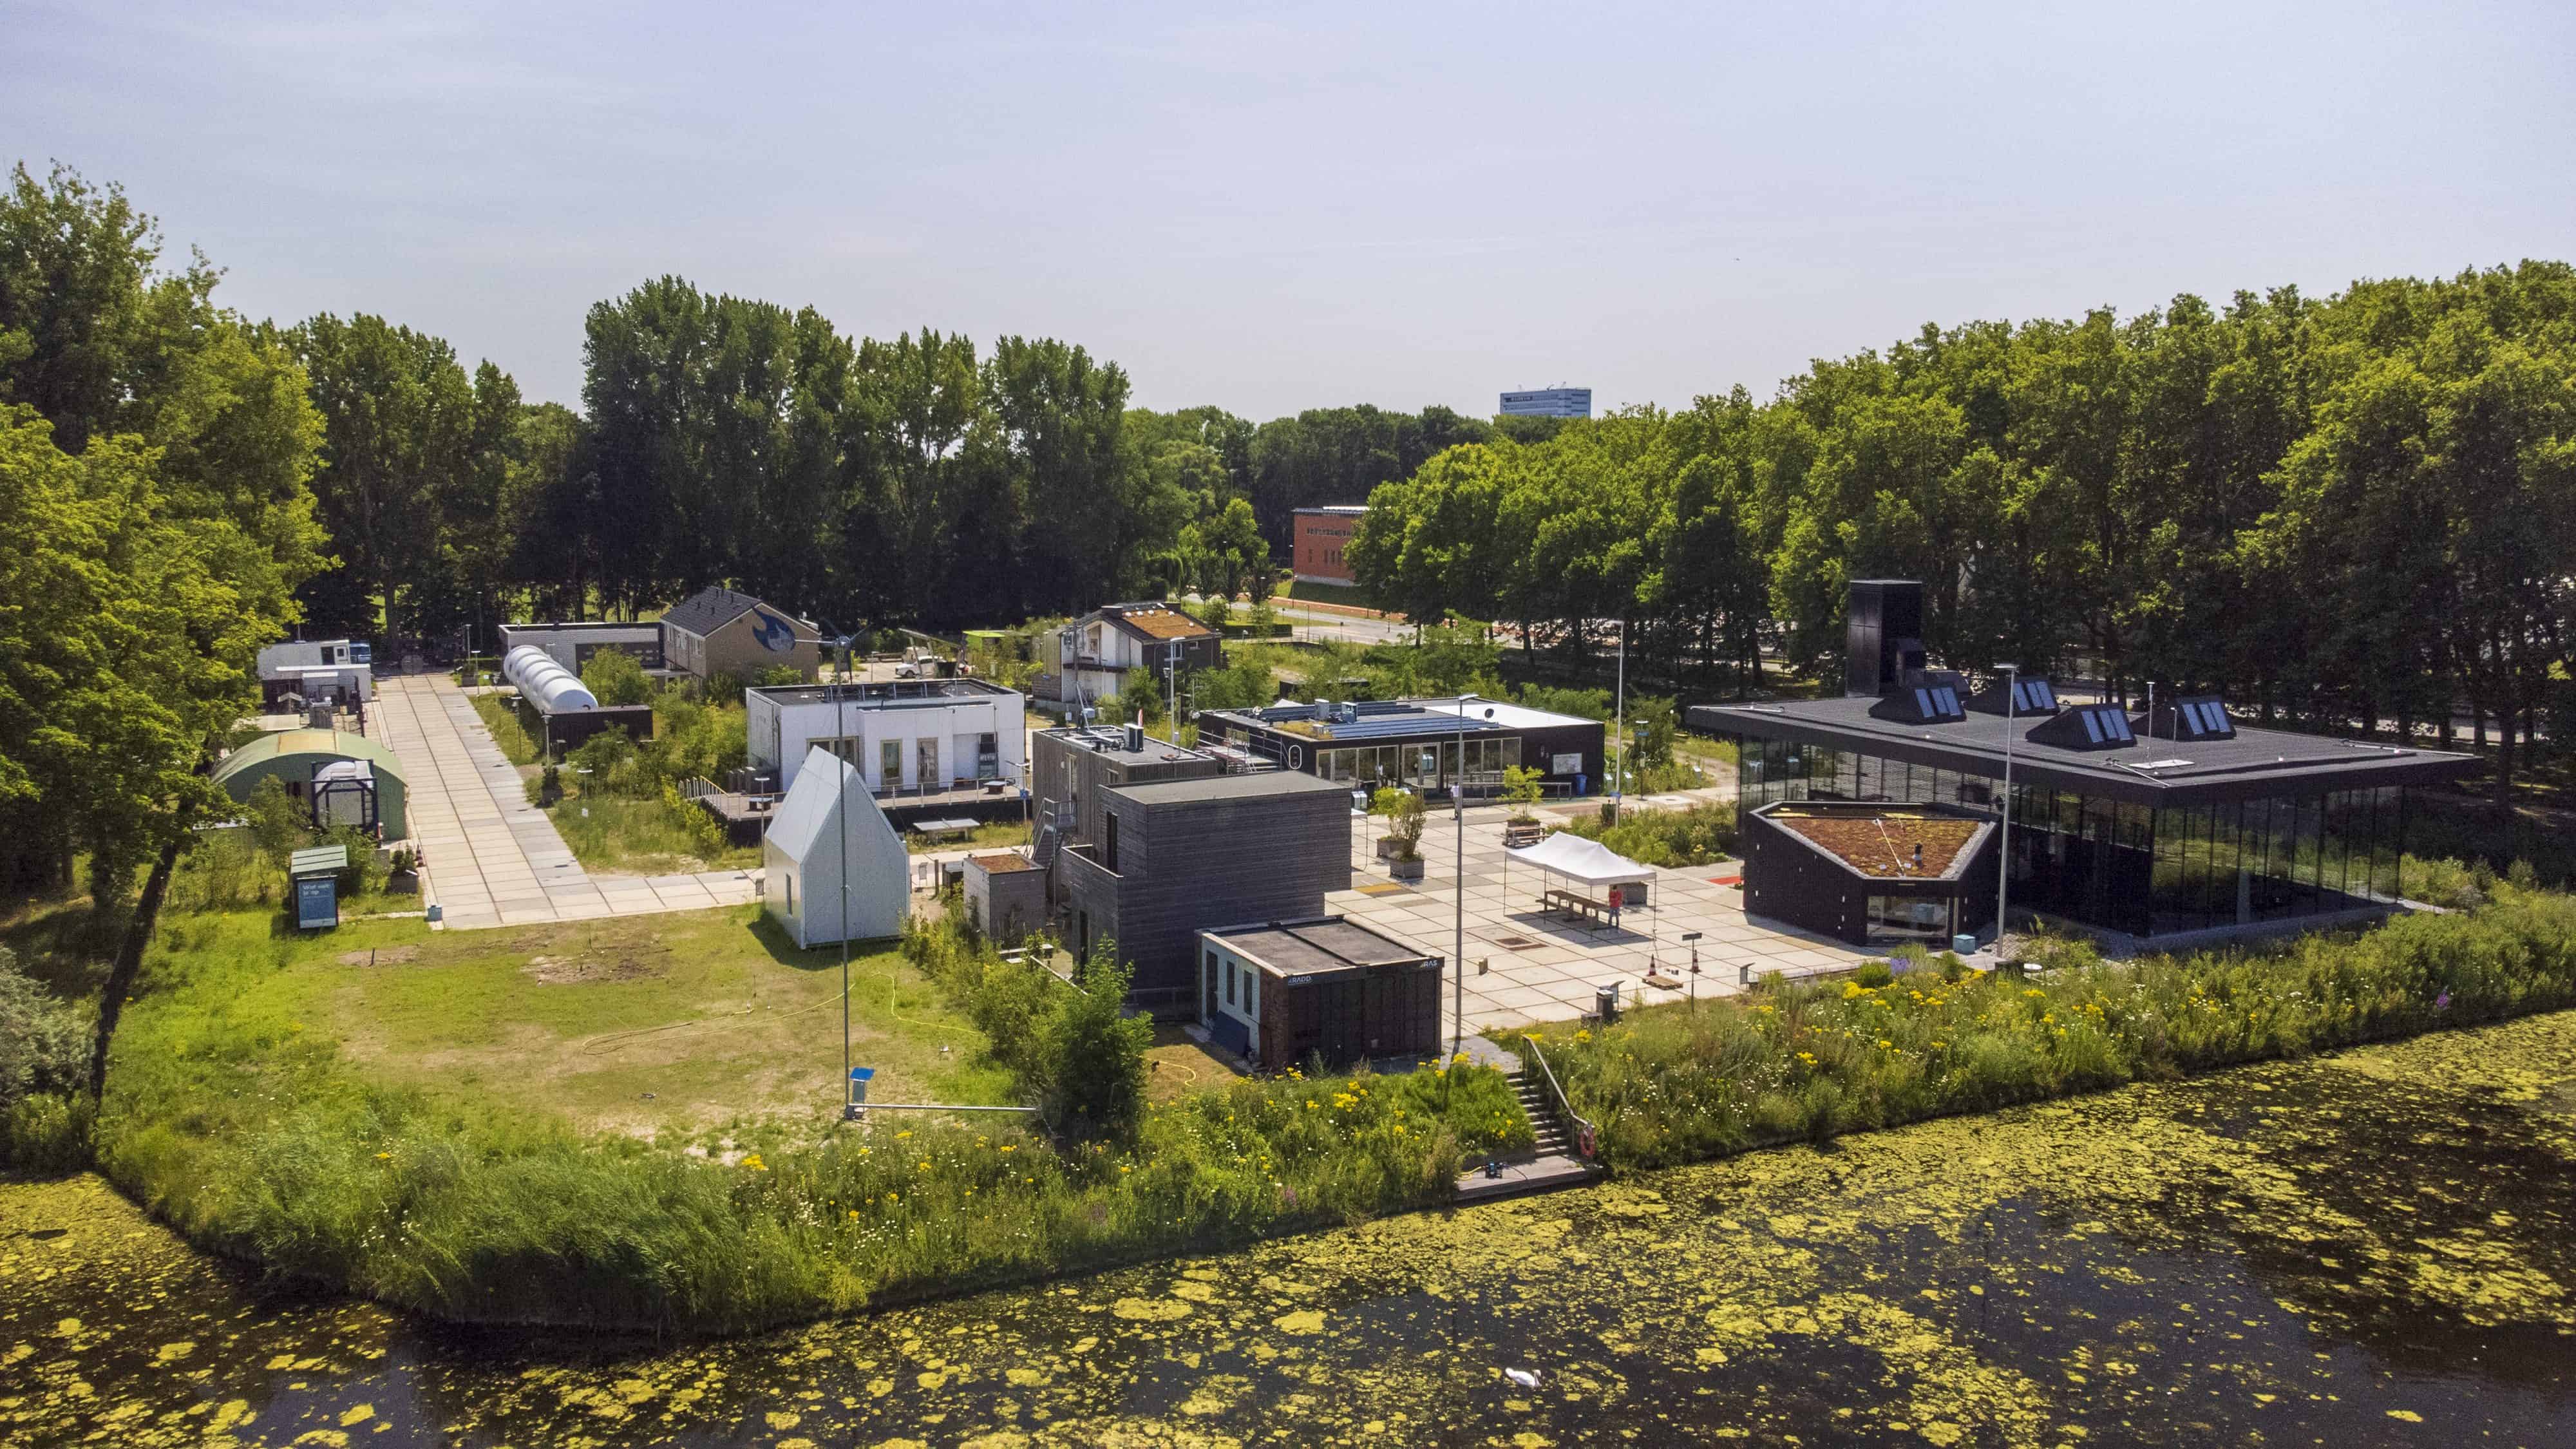 TU Delft establishes Biobased Boulevard to encourage the use of natural building materials